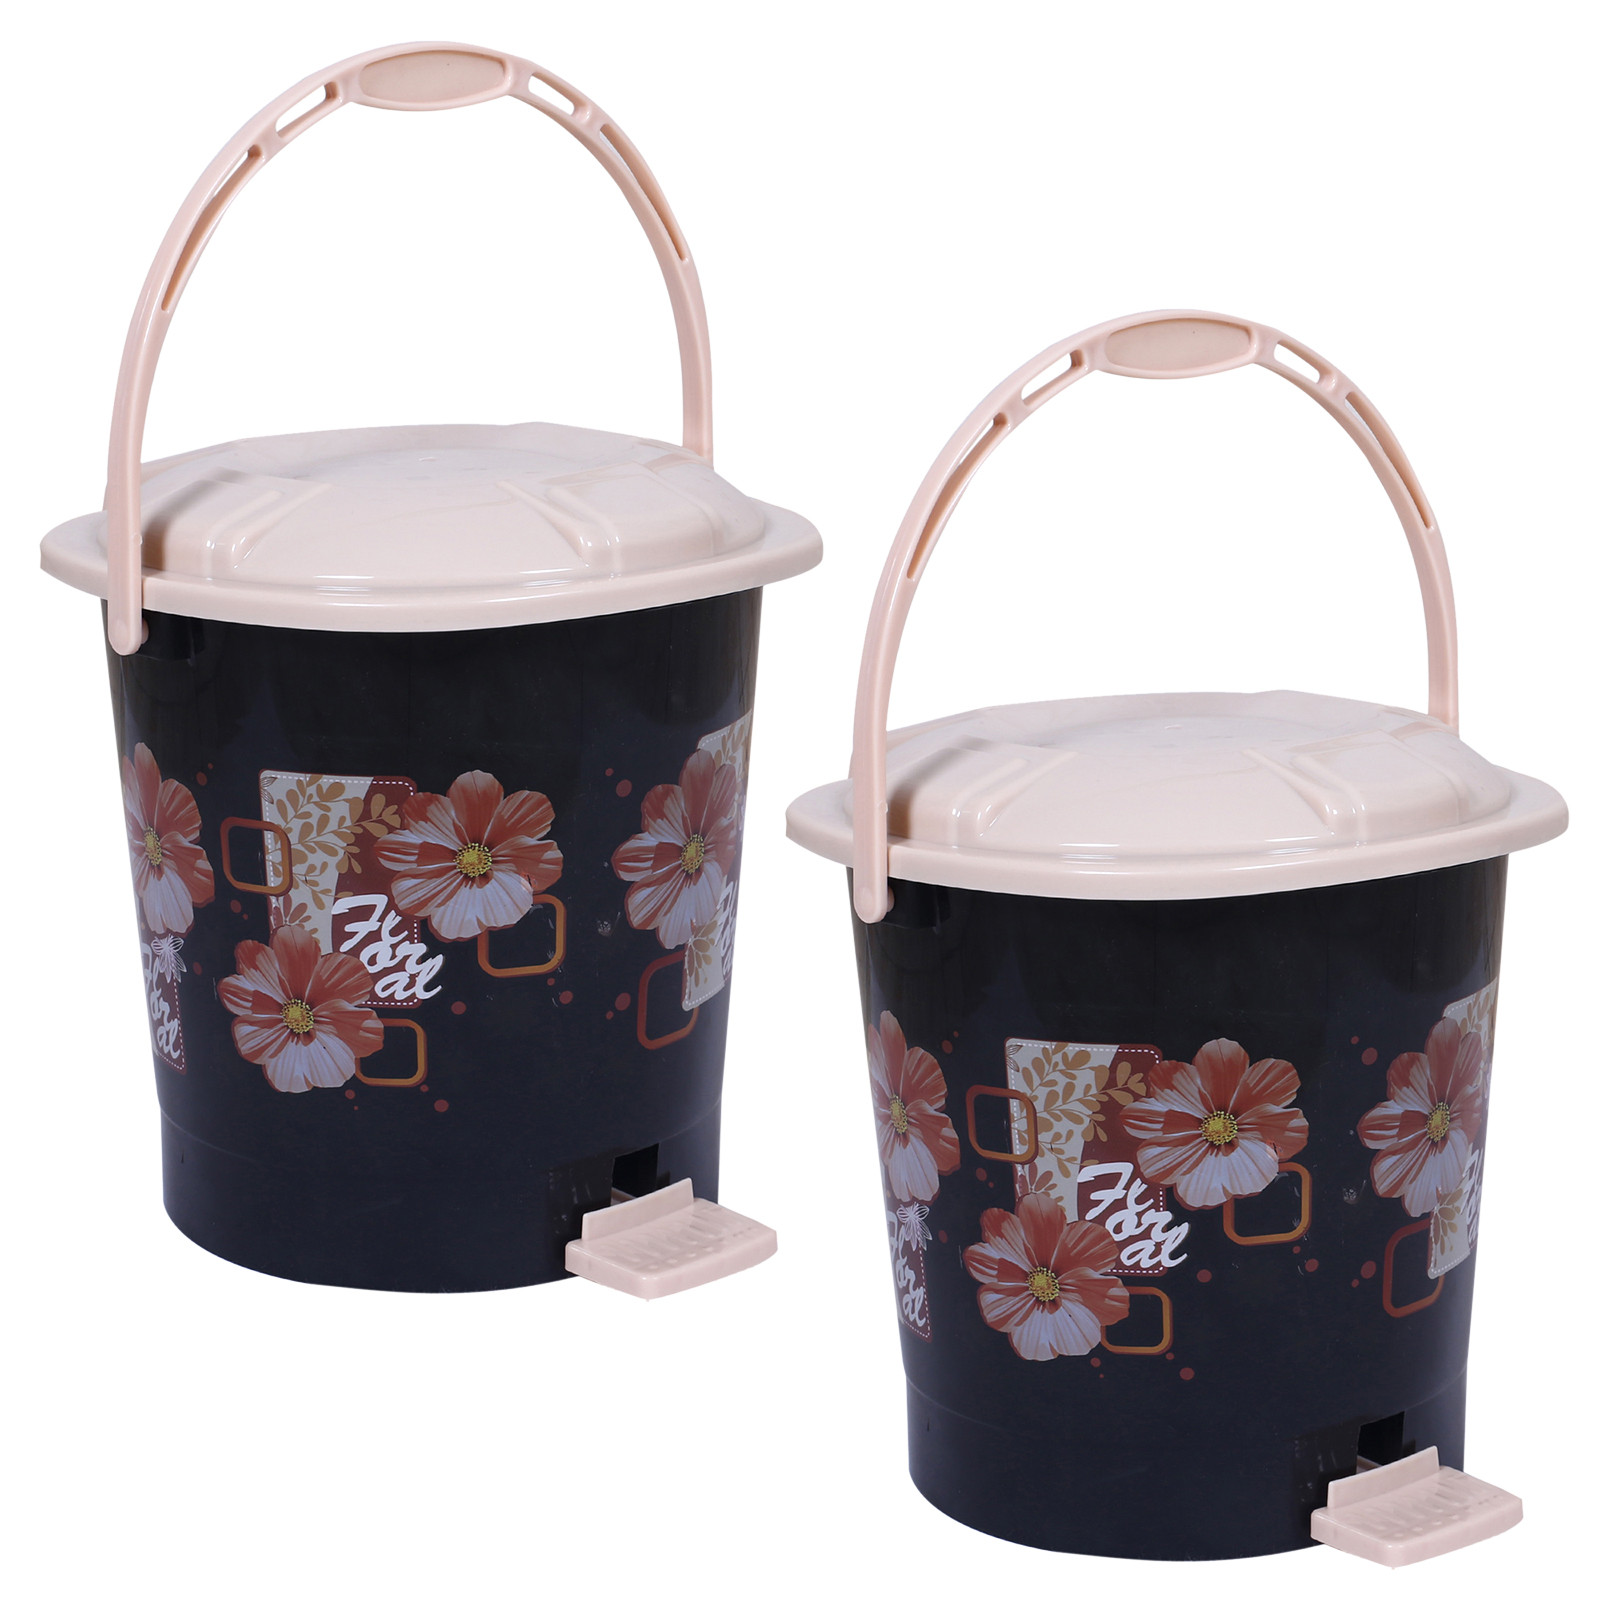 Kuber Industries Durable Floral Print Plastic Pedal Dustbin|Waste Bin|Trash Can For Kitchen & Home With Handle,10 Litre,Pack of 2 (Black)